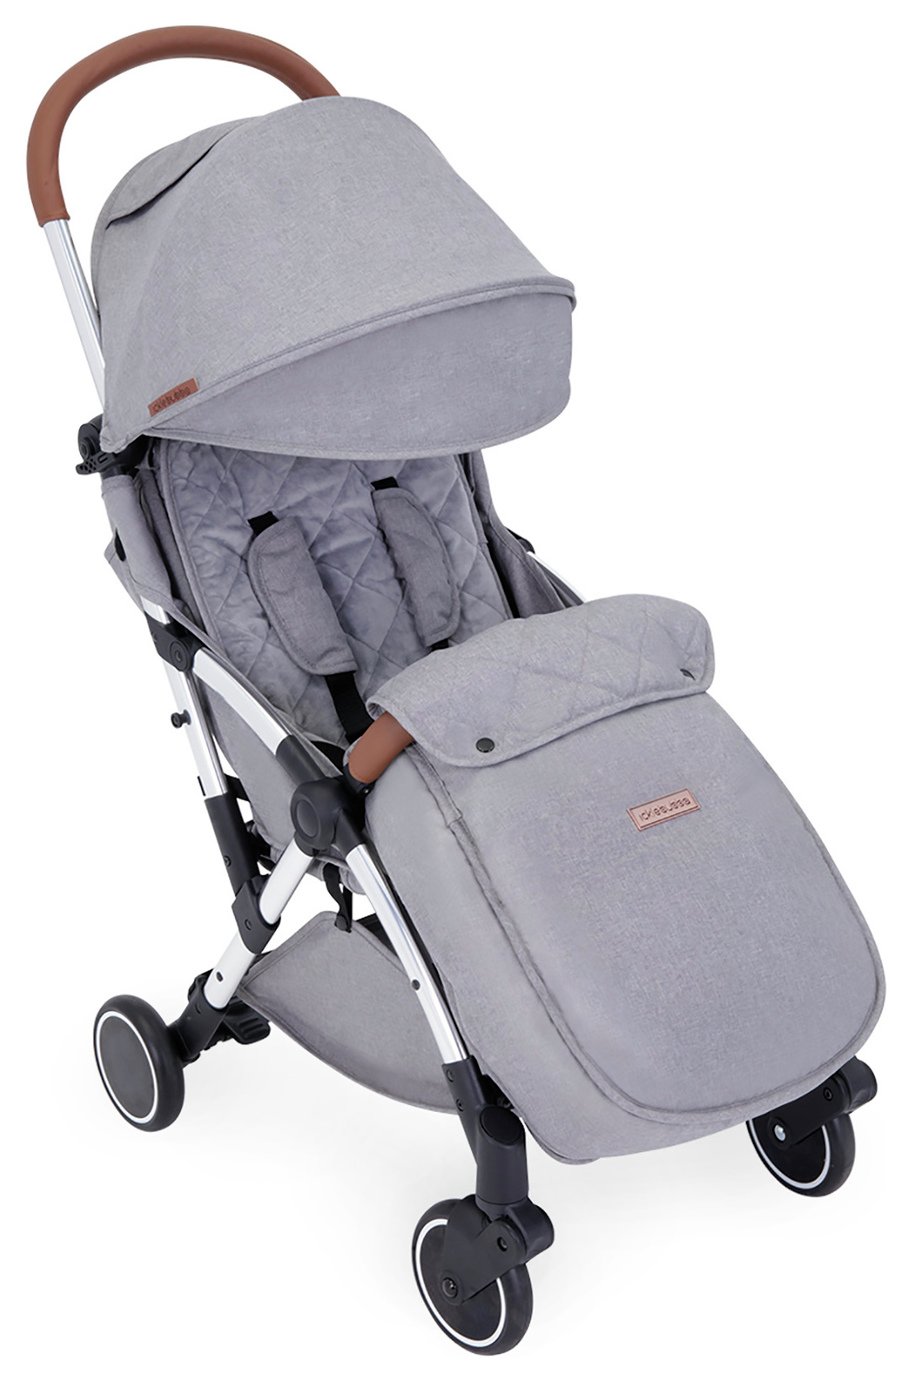 Ickle Bubba Globe Prime Stroller Review